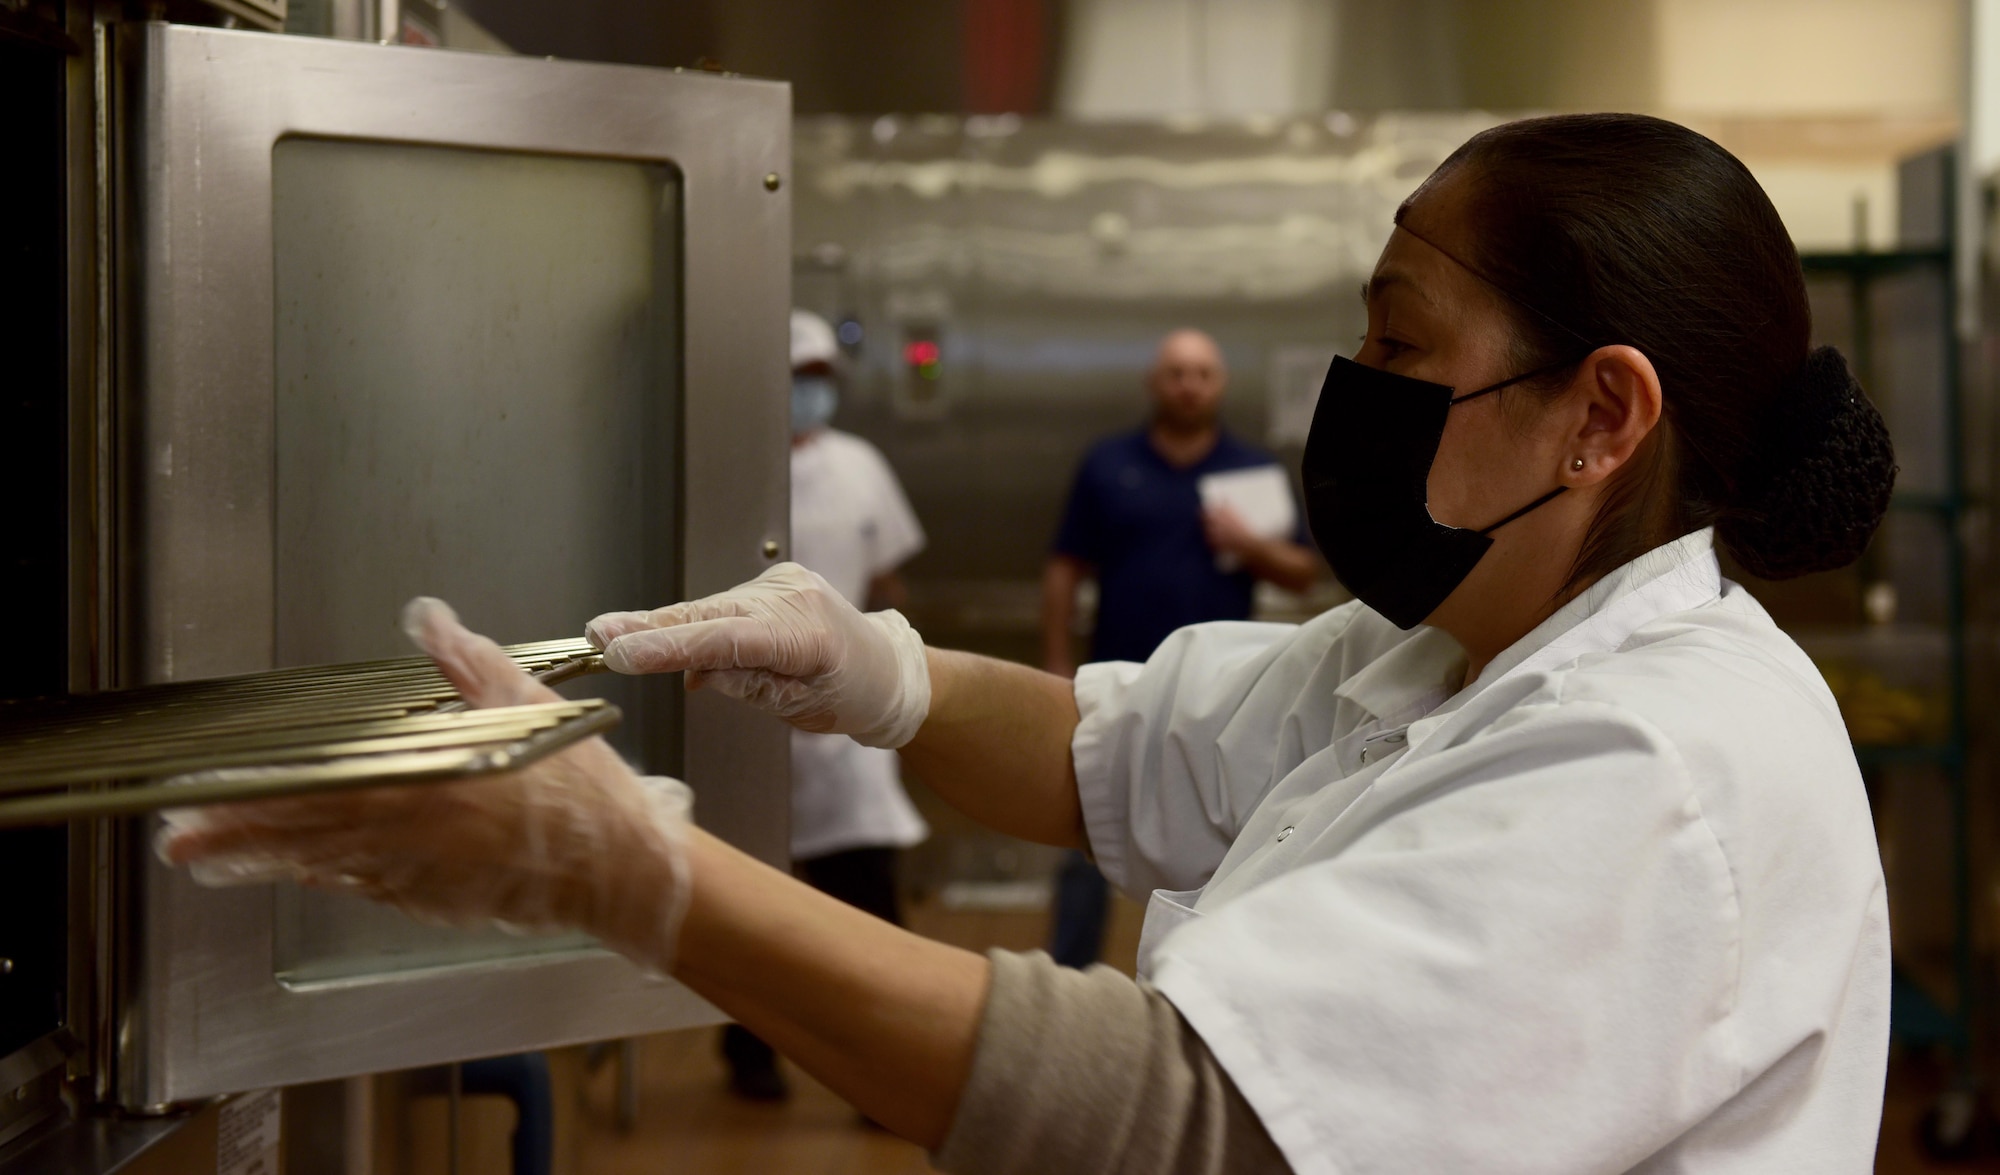 Patricia Munoz, Guardian Dining Facility (DFAC) food service worker, replaces oven racks after cleaning them at Creech Air Force Base, Nevada, April 17, 2020.